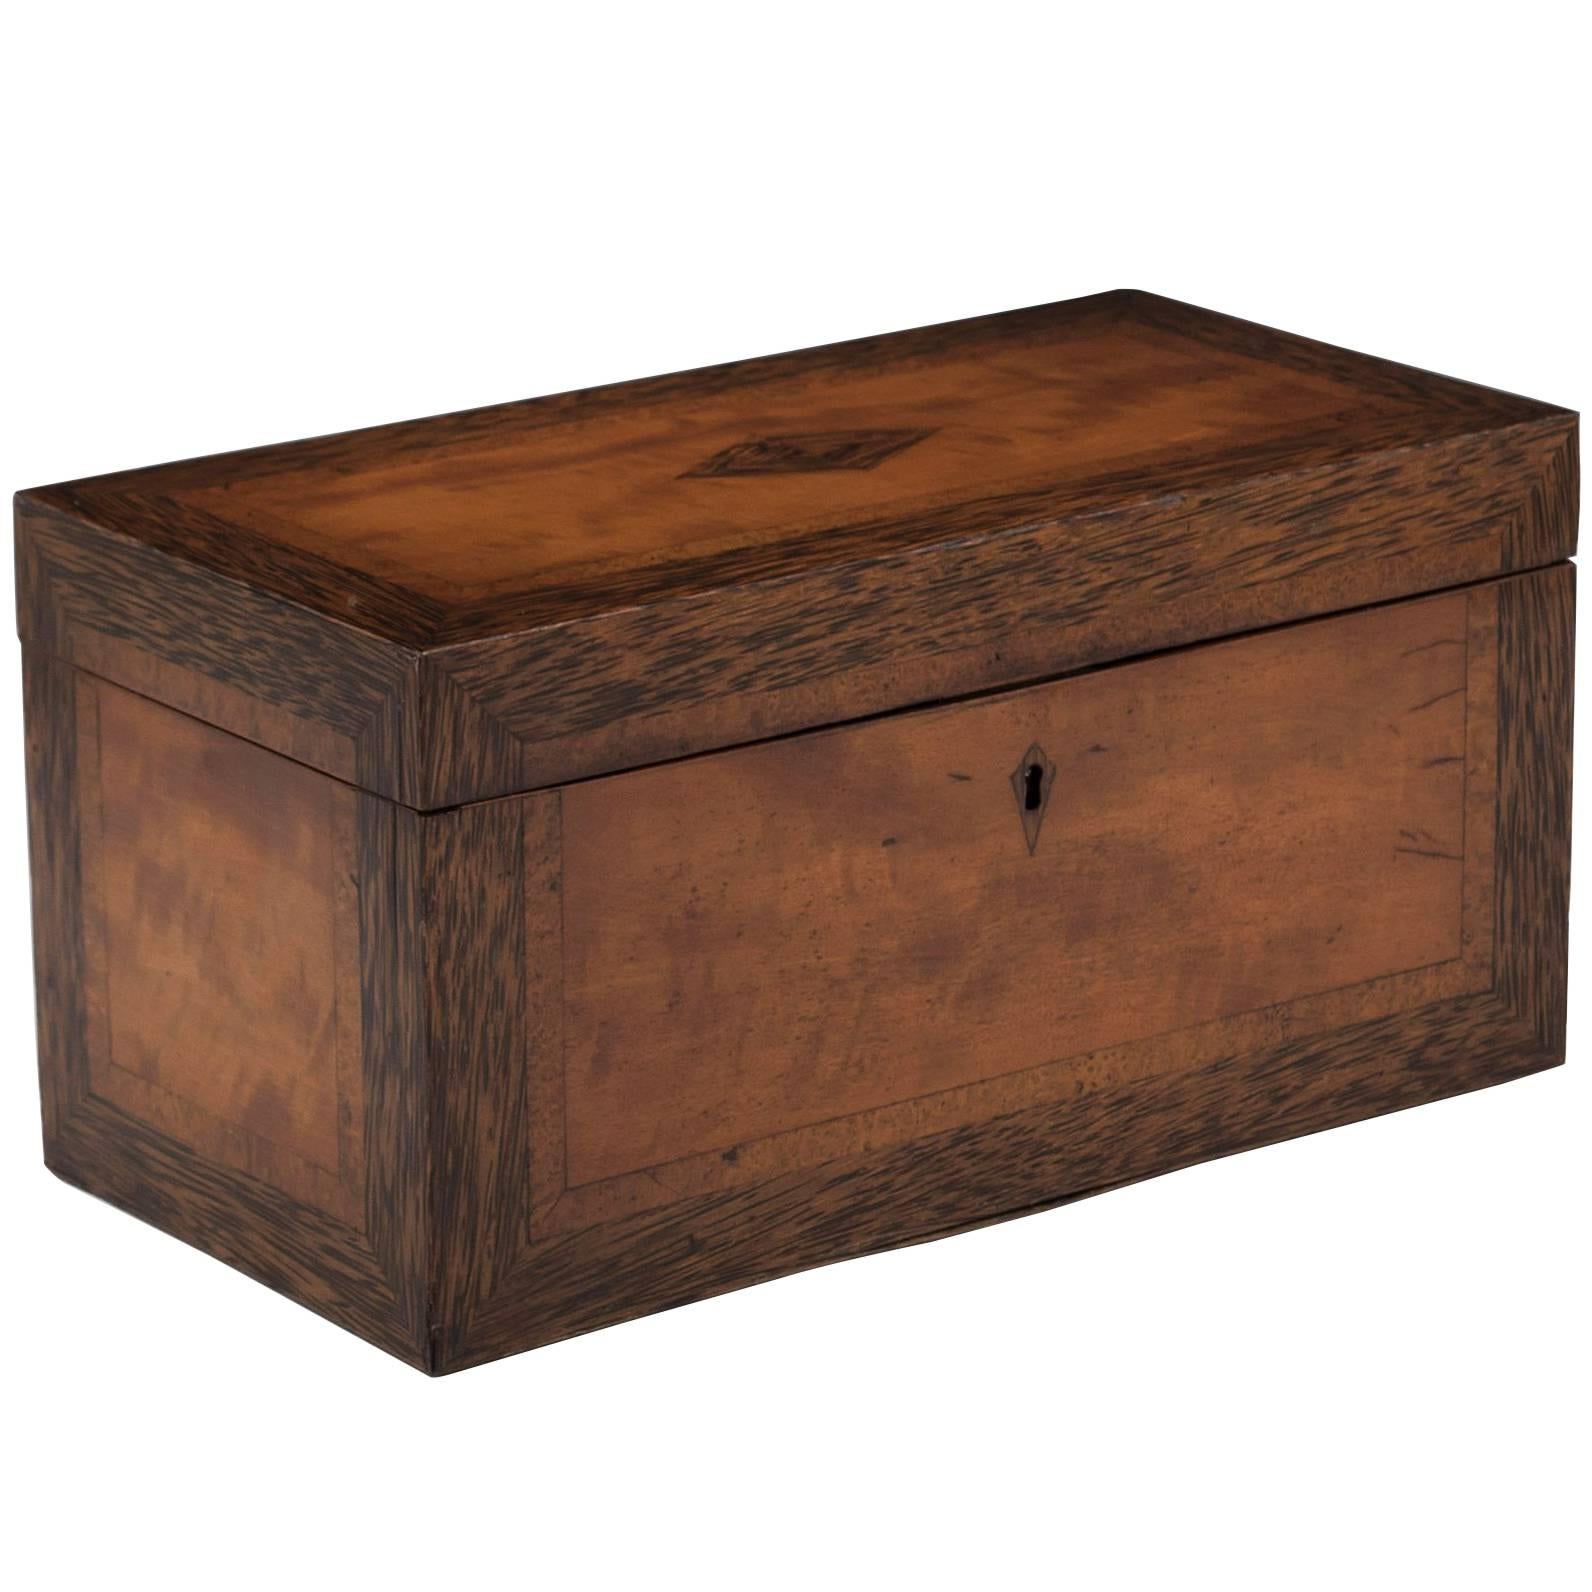 Georgian Satinwood Tea Chest with Glass Tea Caddy Bowl, 19th Century For Sale